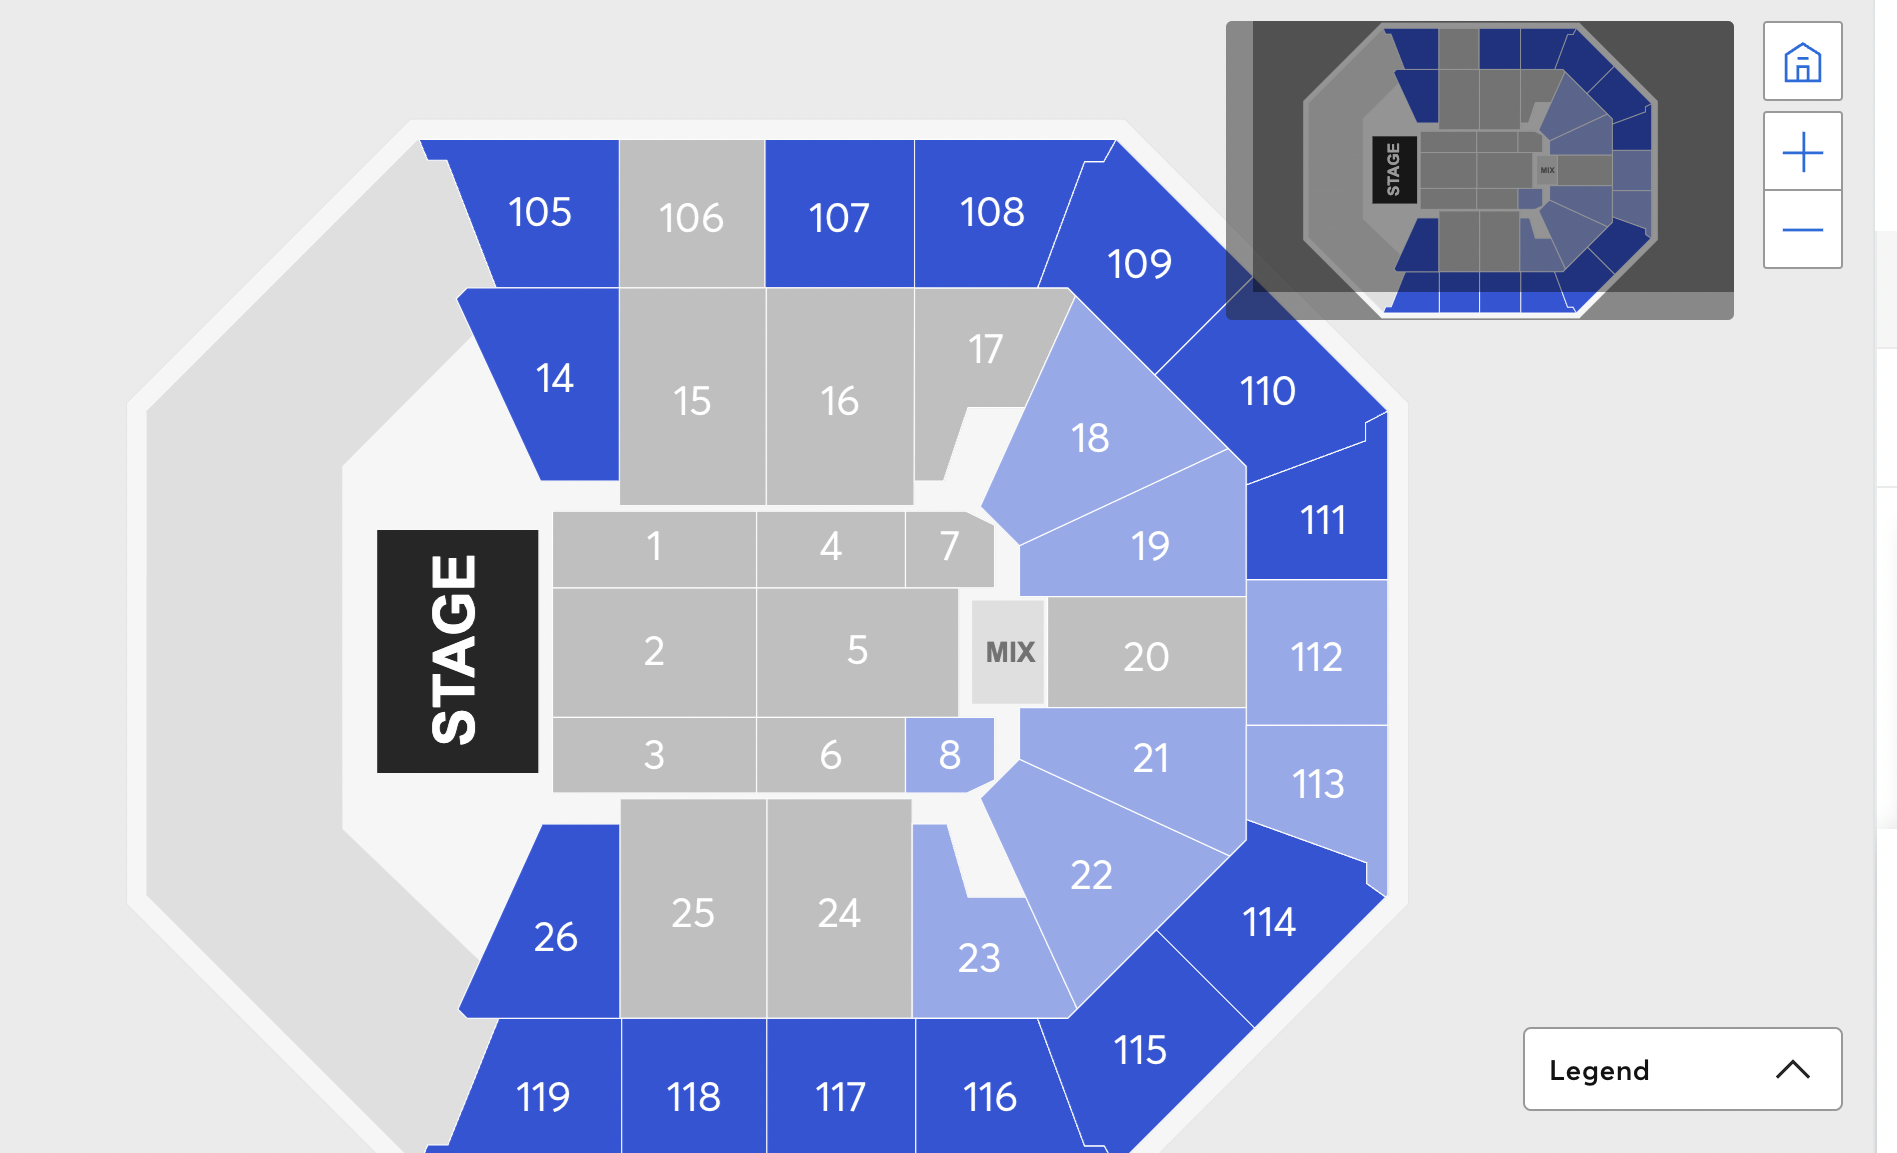 Tickets on the floor are around $100-$200 while the upper bowl is priced at $90 depending on the section